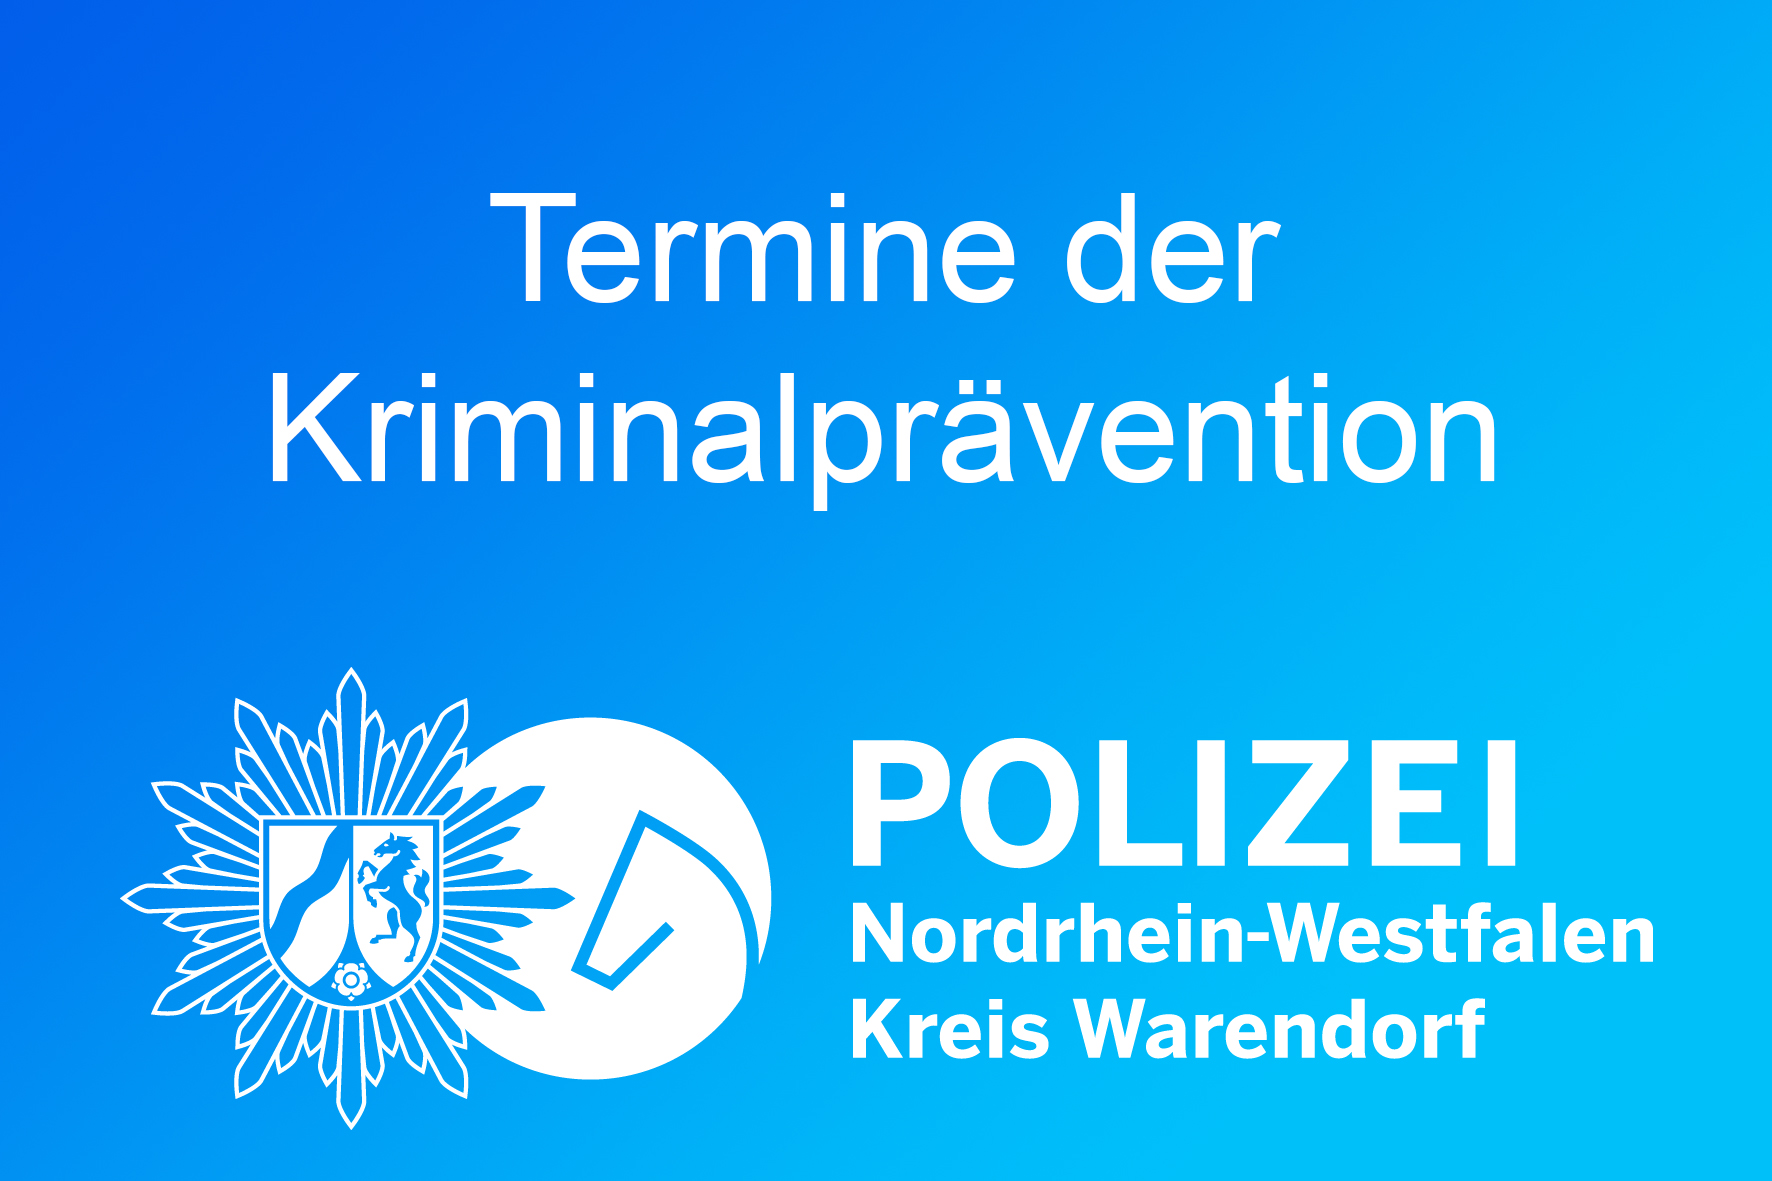 Crime prevention appointments